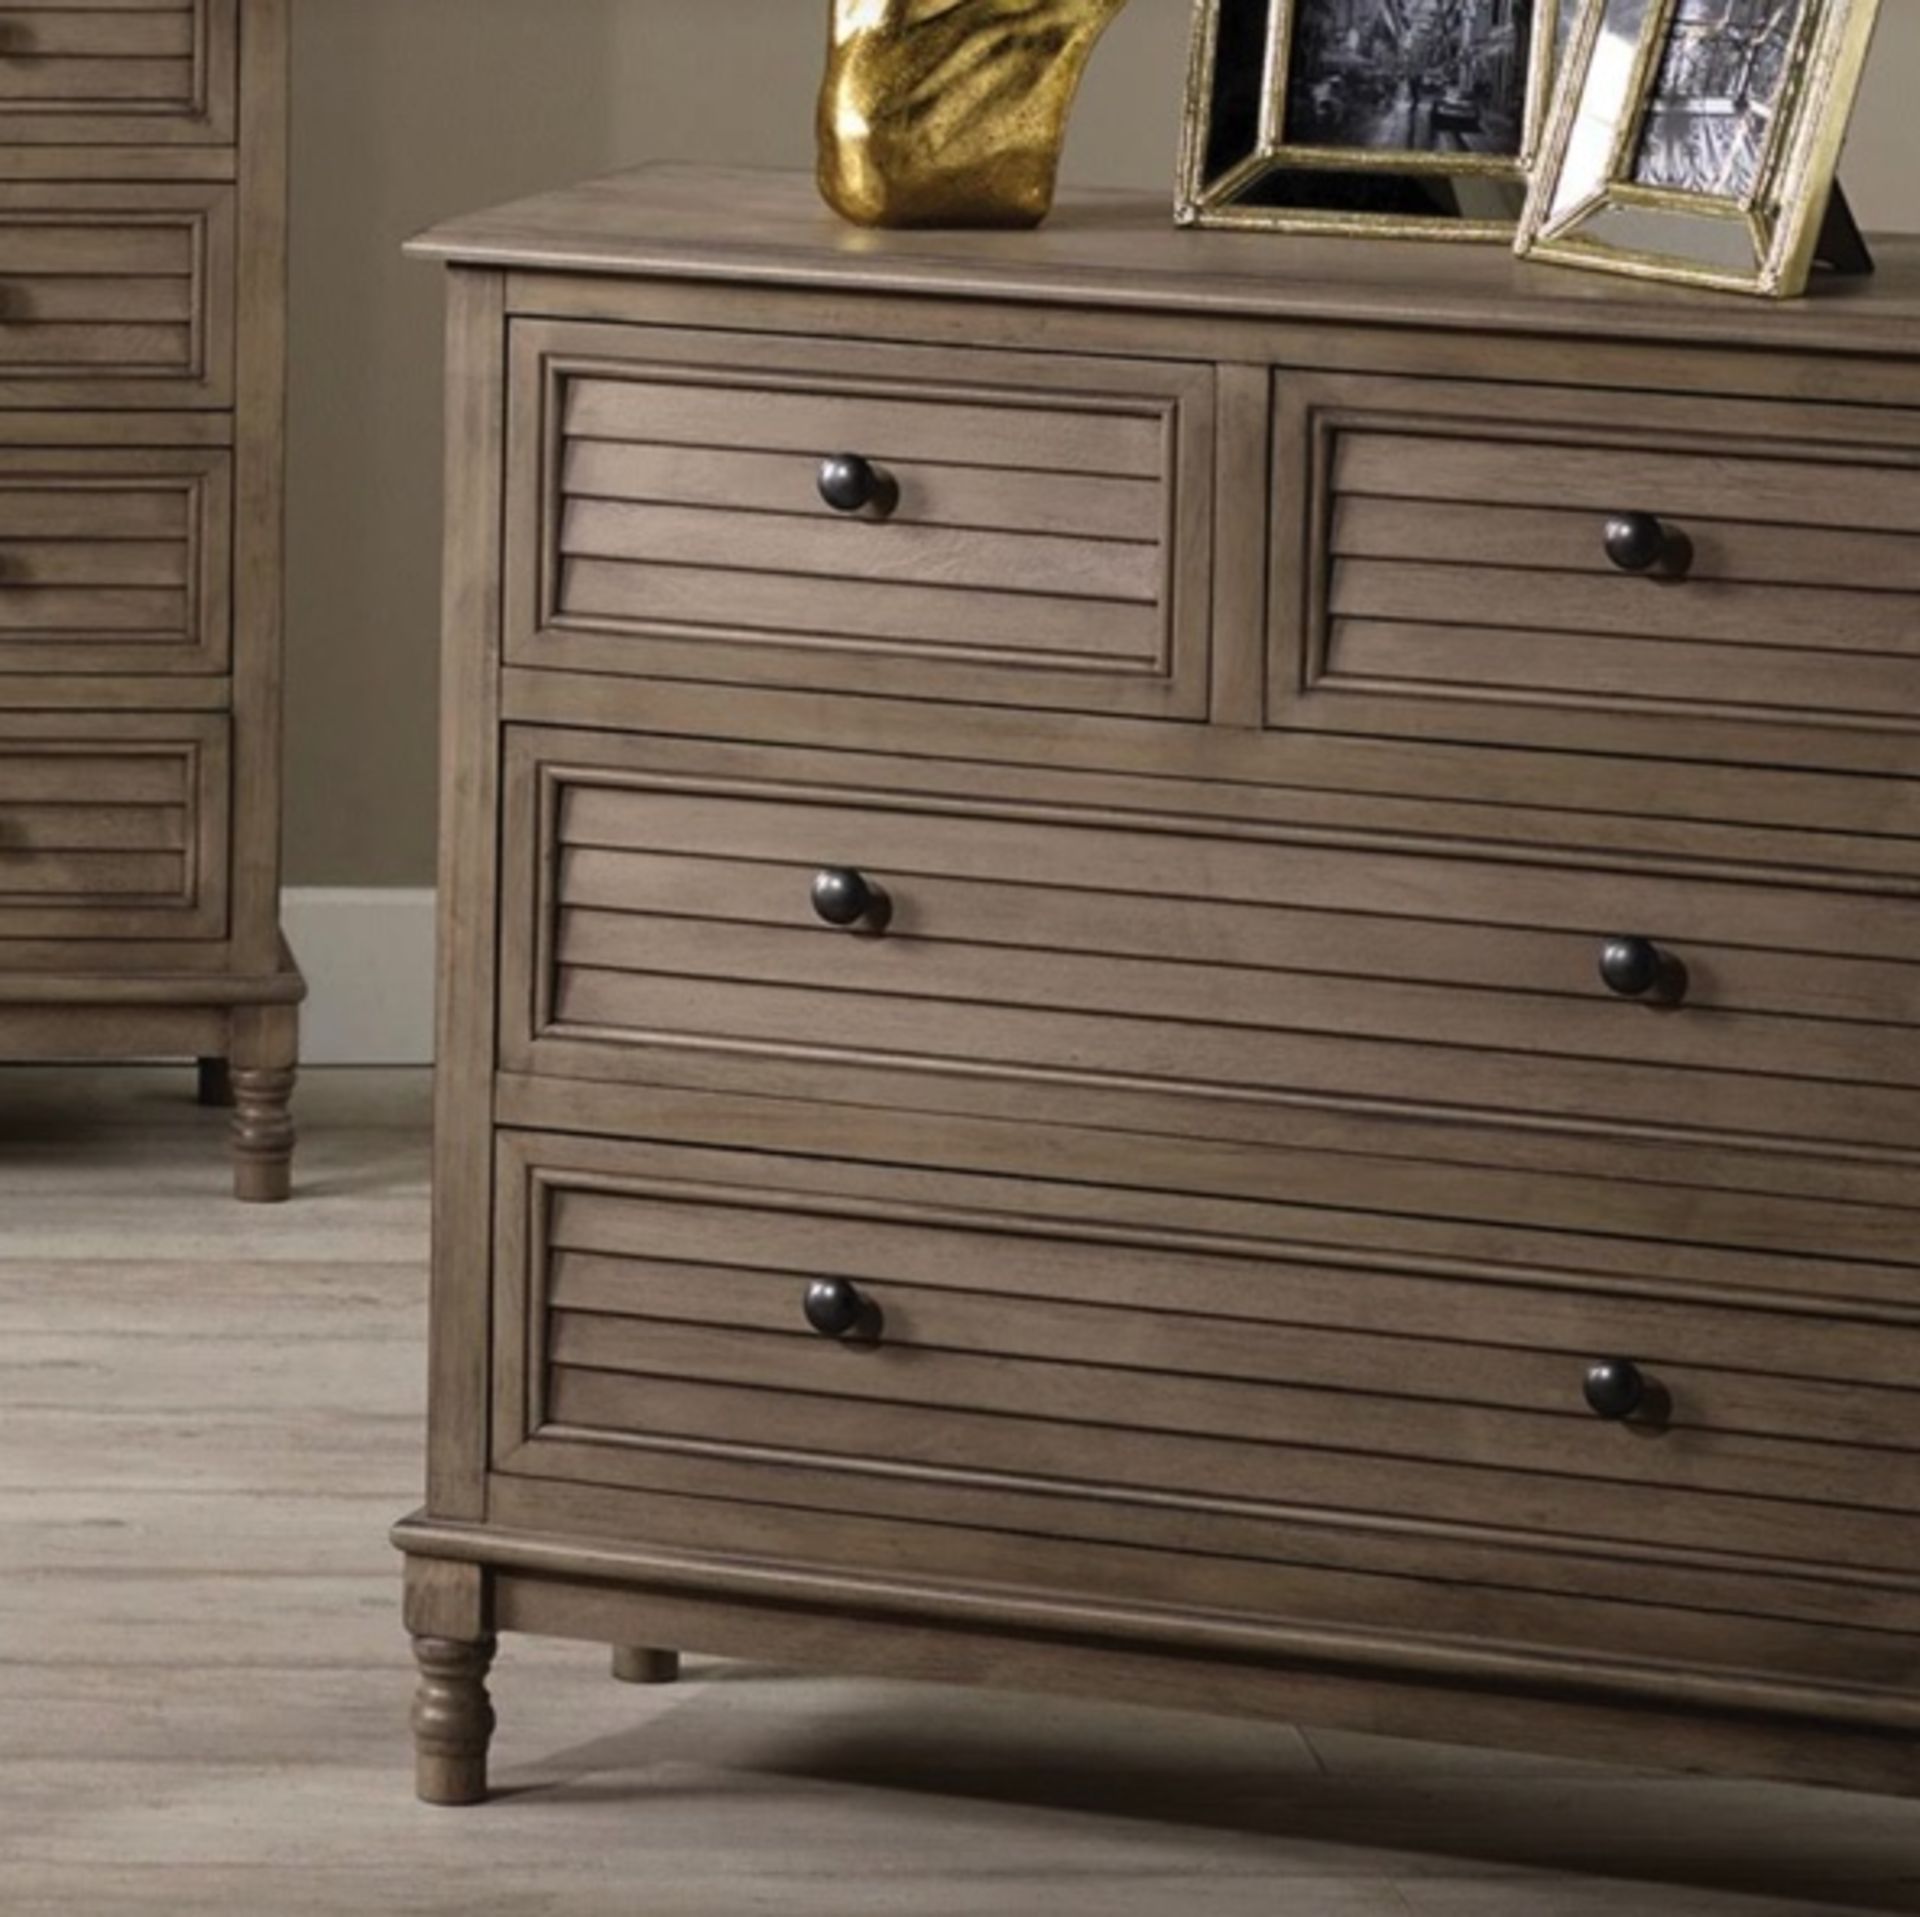 New in Box Ashwell Taupe Pine Wood 4 Drawer Unit RRP £349 **NO VAT** - Image 2 of 2